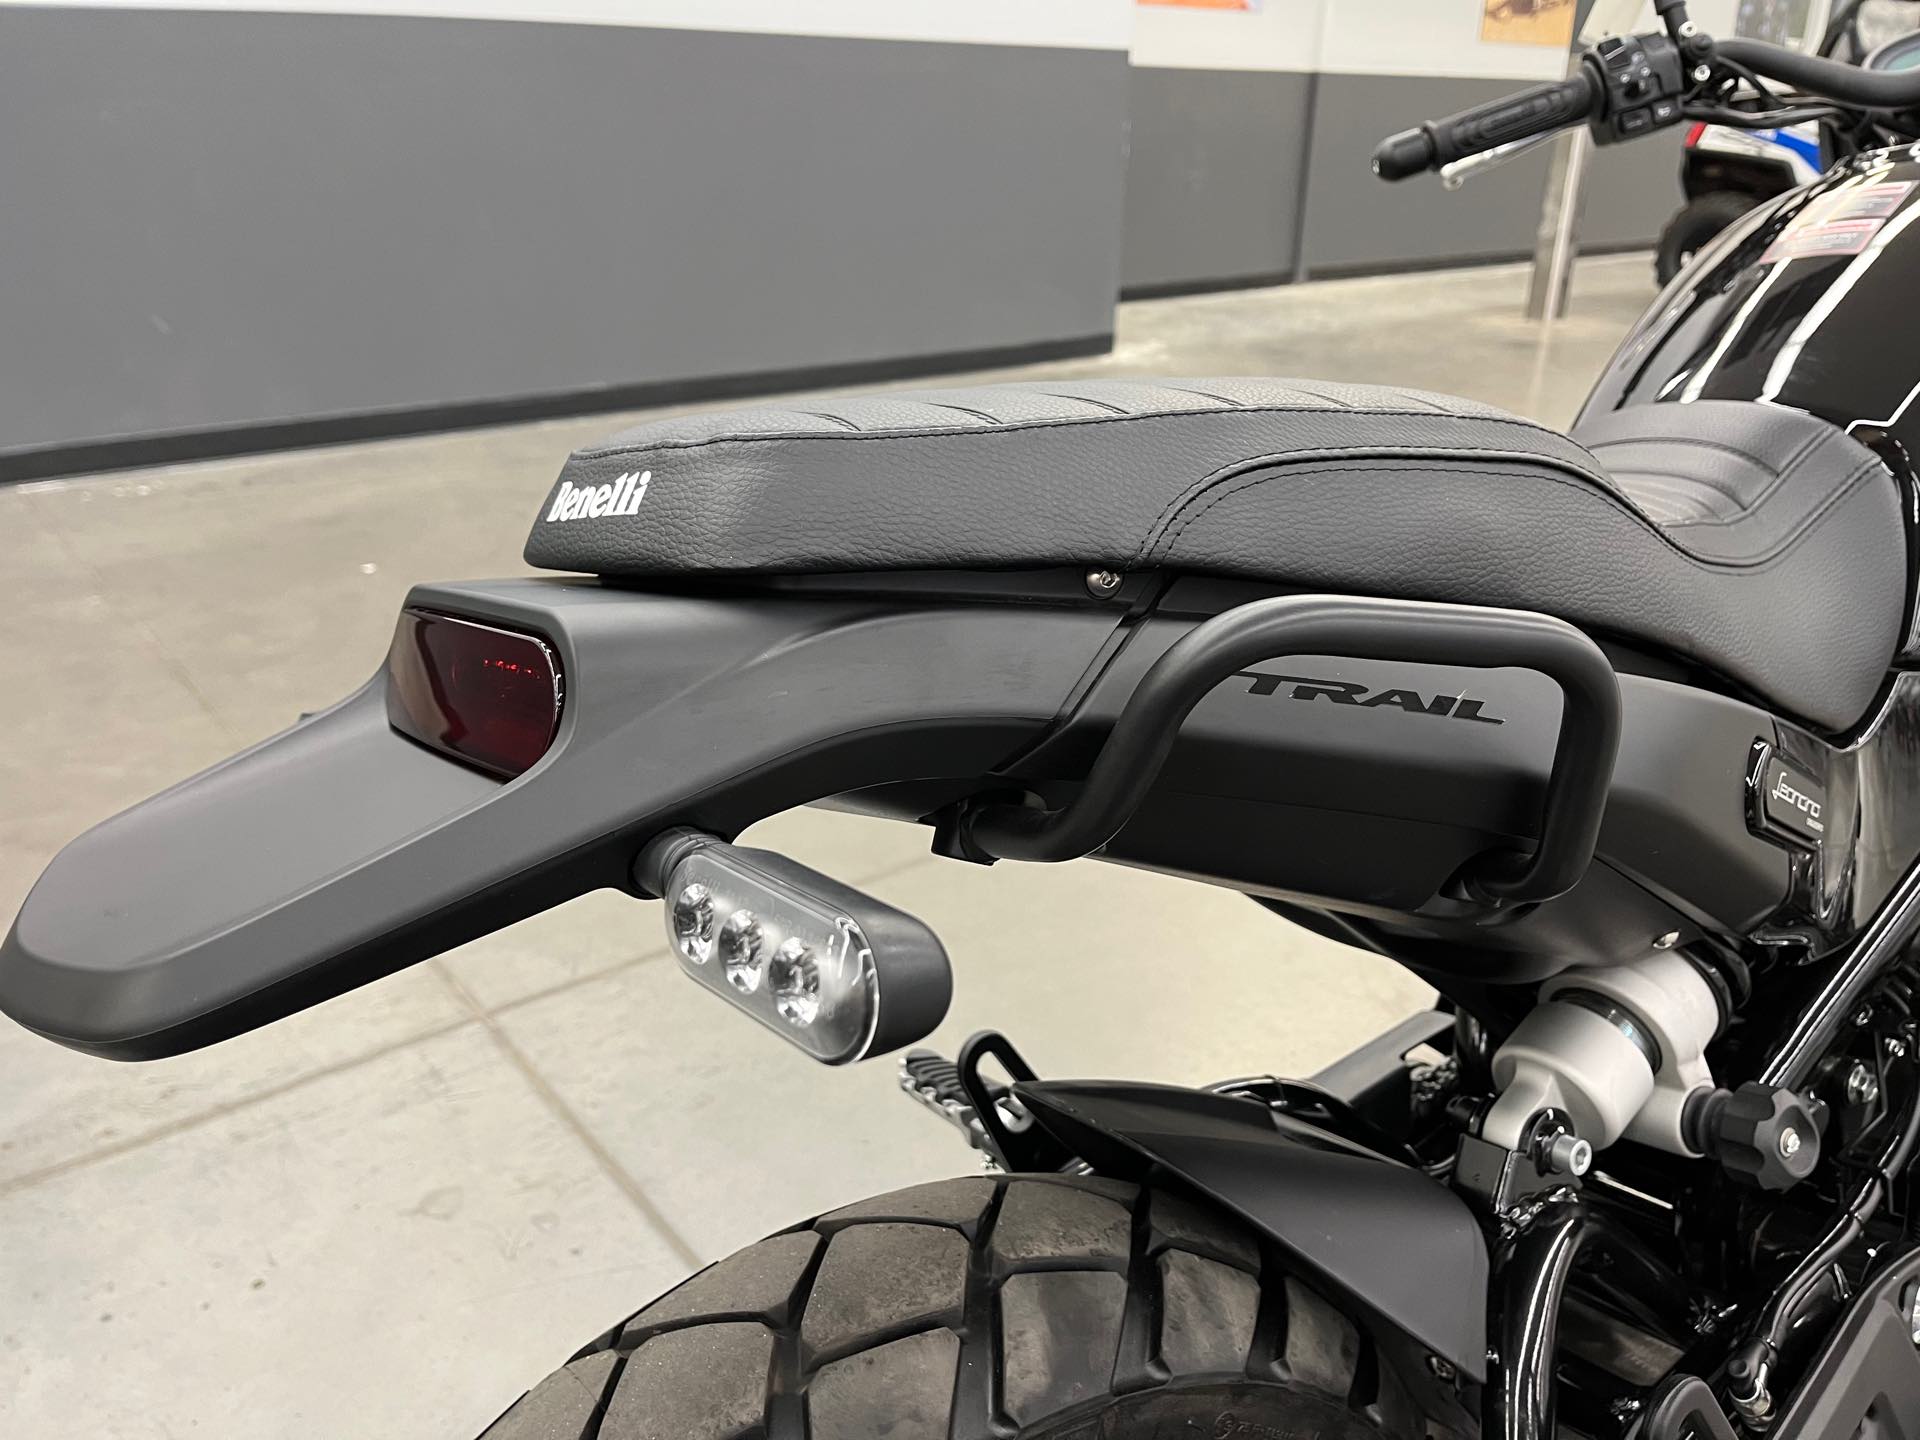 2022 Benelli Leoncino 500 at Aces Motorcycles - Denver